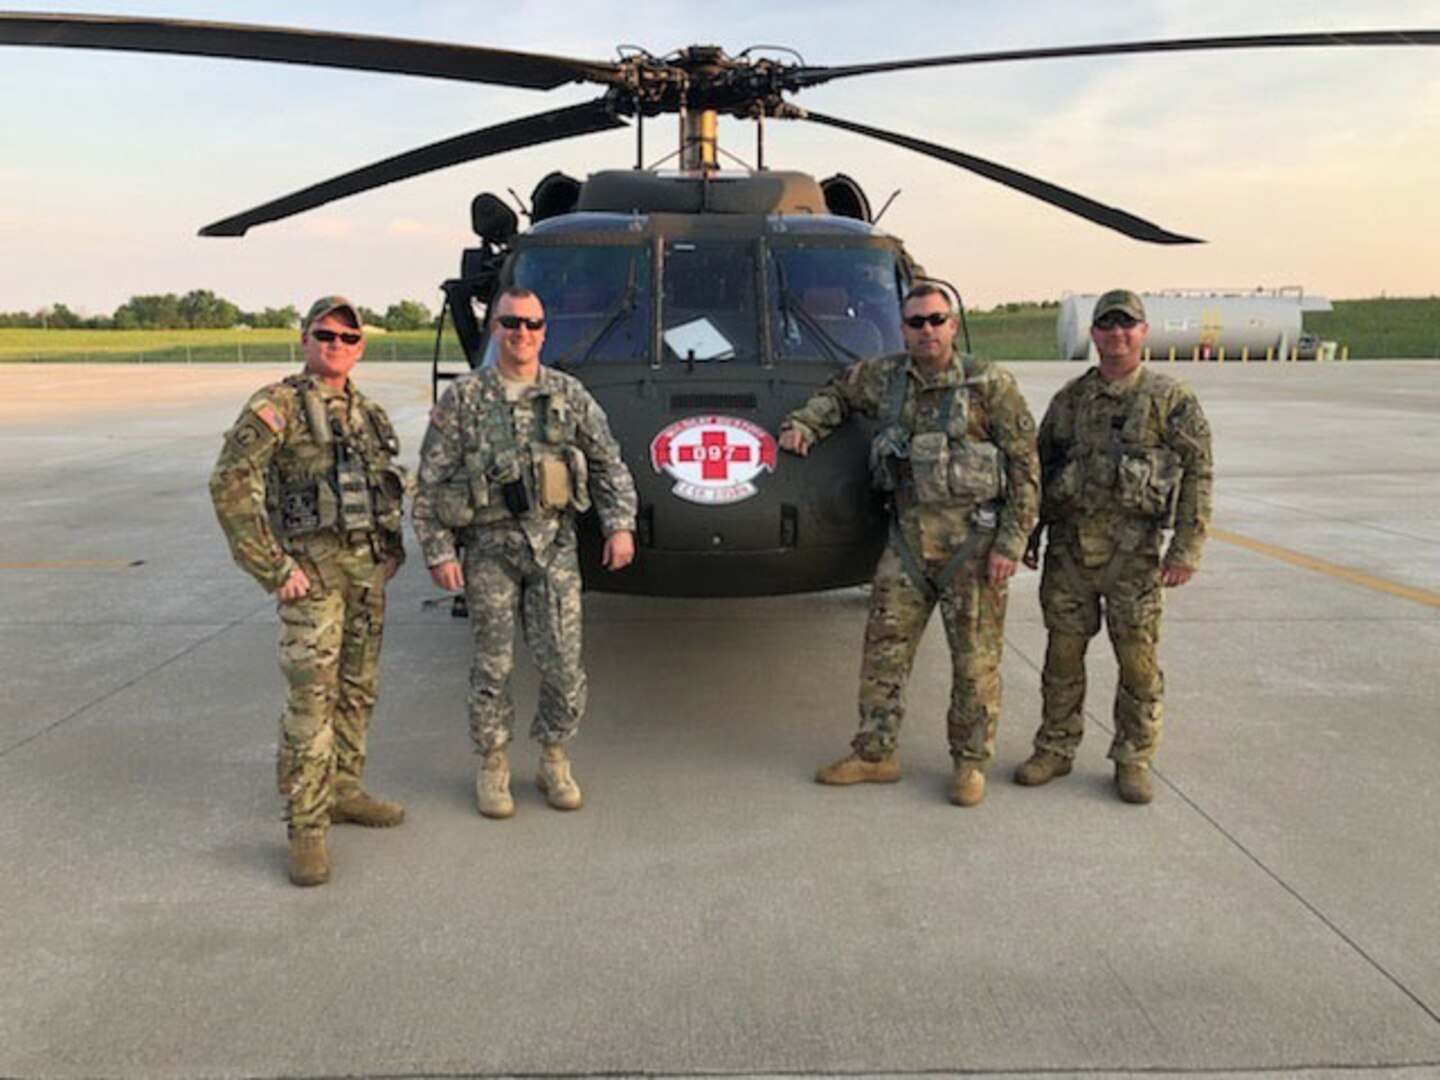 Staff Sgt. Jeremy Lowe, Chief Warrant Officer Cliff Flanagan, Capt. Jonathan Strayer, Staff Sgt. Shaun Morris, left to right, with Charlie Company, 2nd battalion, 238th Aviation, responded to a request for assistance from Wolfe County Emergency Management for a hoist rescue near Slade, Ky., May 18, 2019. The Guardsmen conducted a medical evacuation of a patient from a cliff in Natural Bridge State Park.